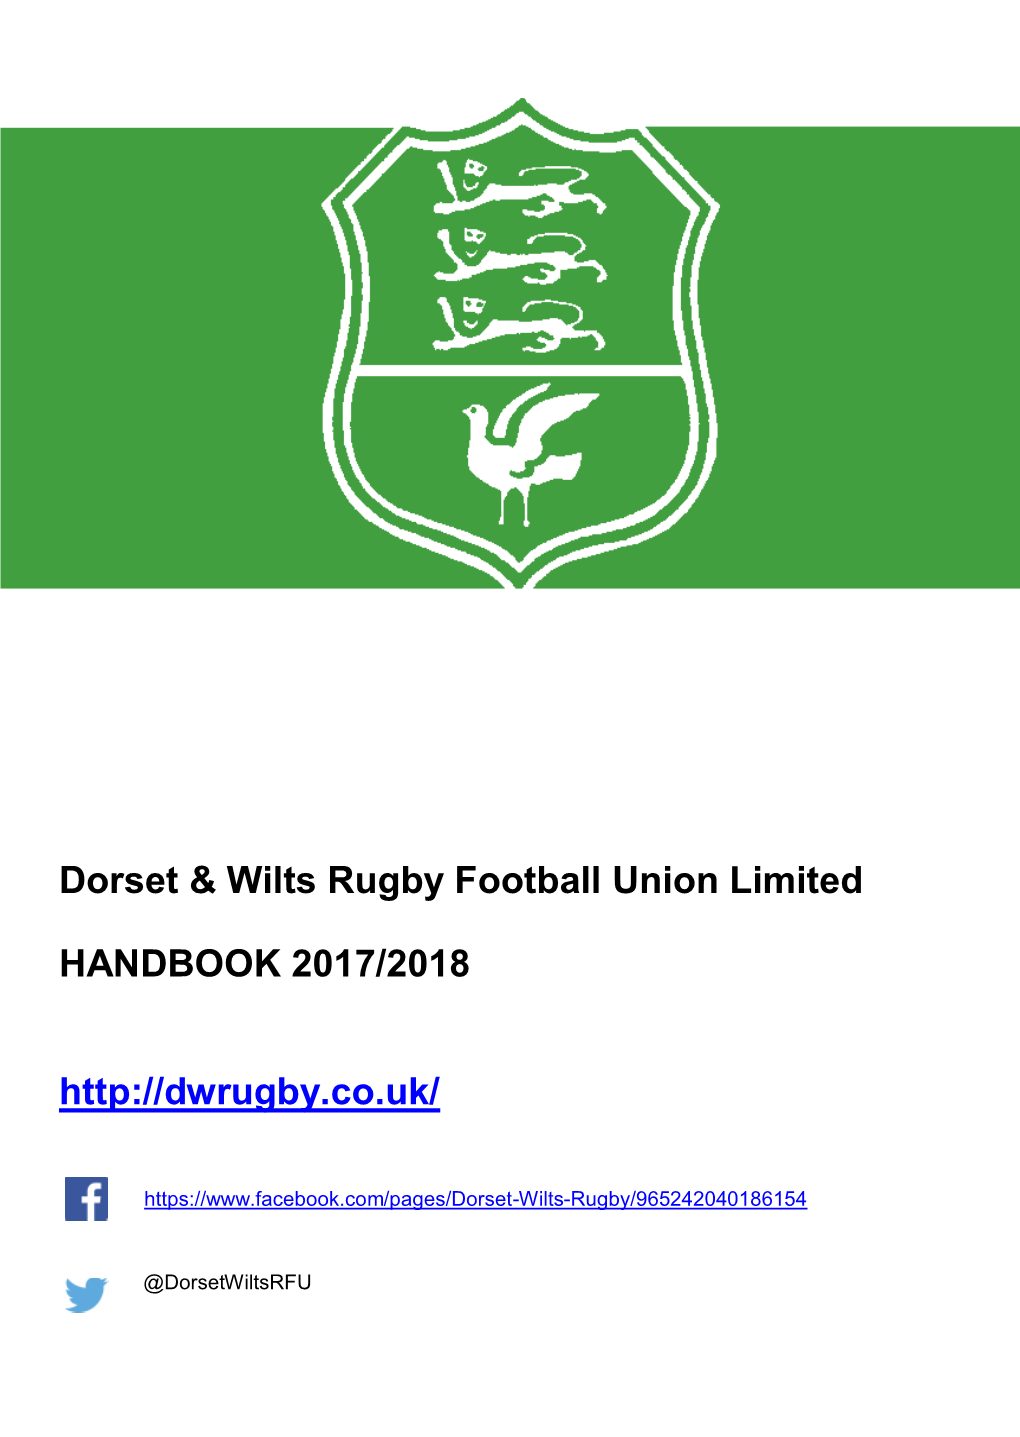 Dorset & Wilts Rugby Football Union Limited HANDBOOK 2017/2018